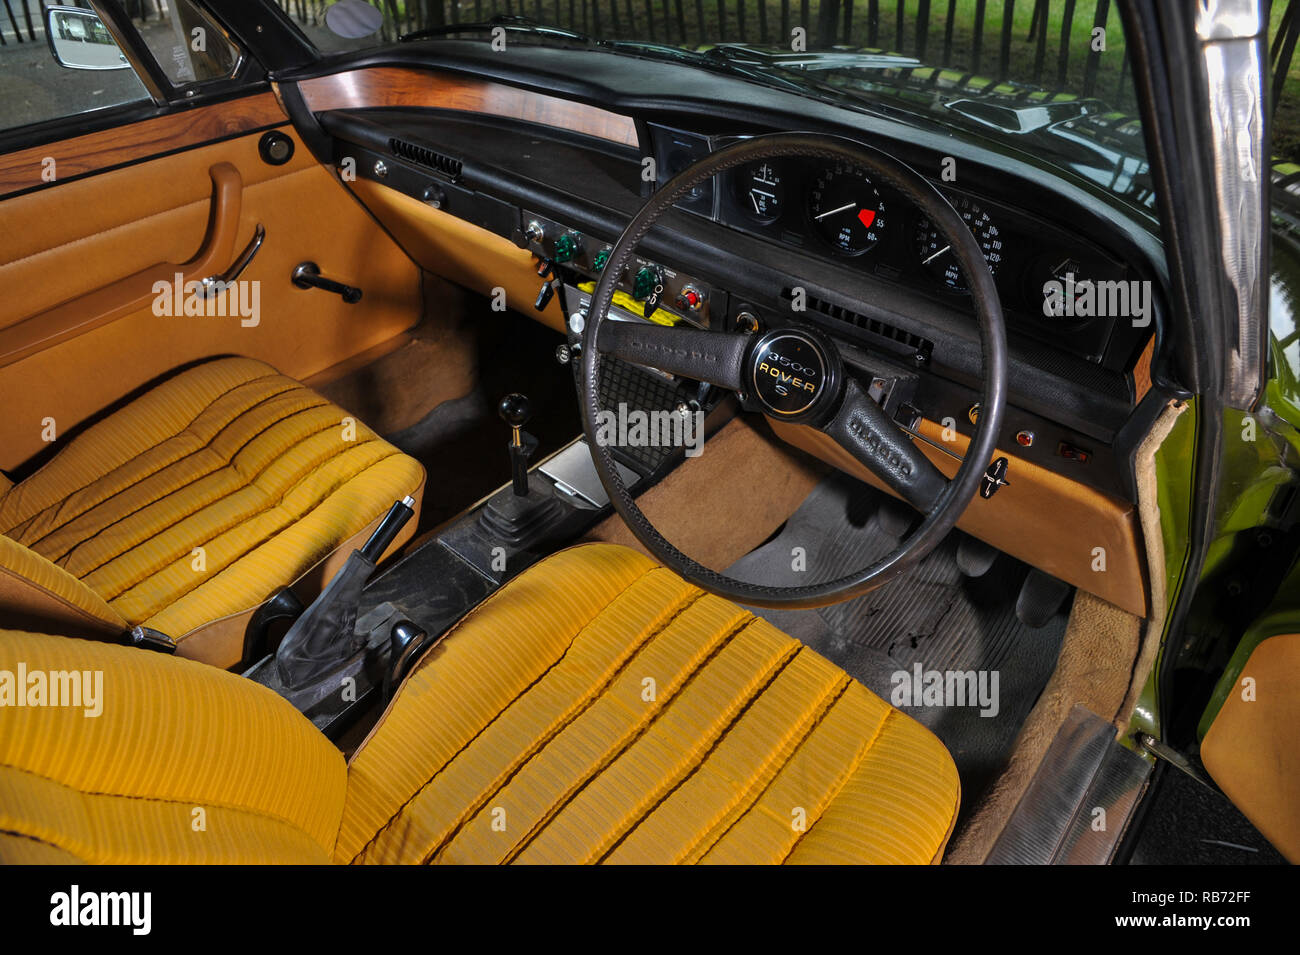 1976 Rover 3500S - manual gearbox V8 Rover P6 registered in 1977 after the end of production Stock Photo